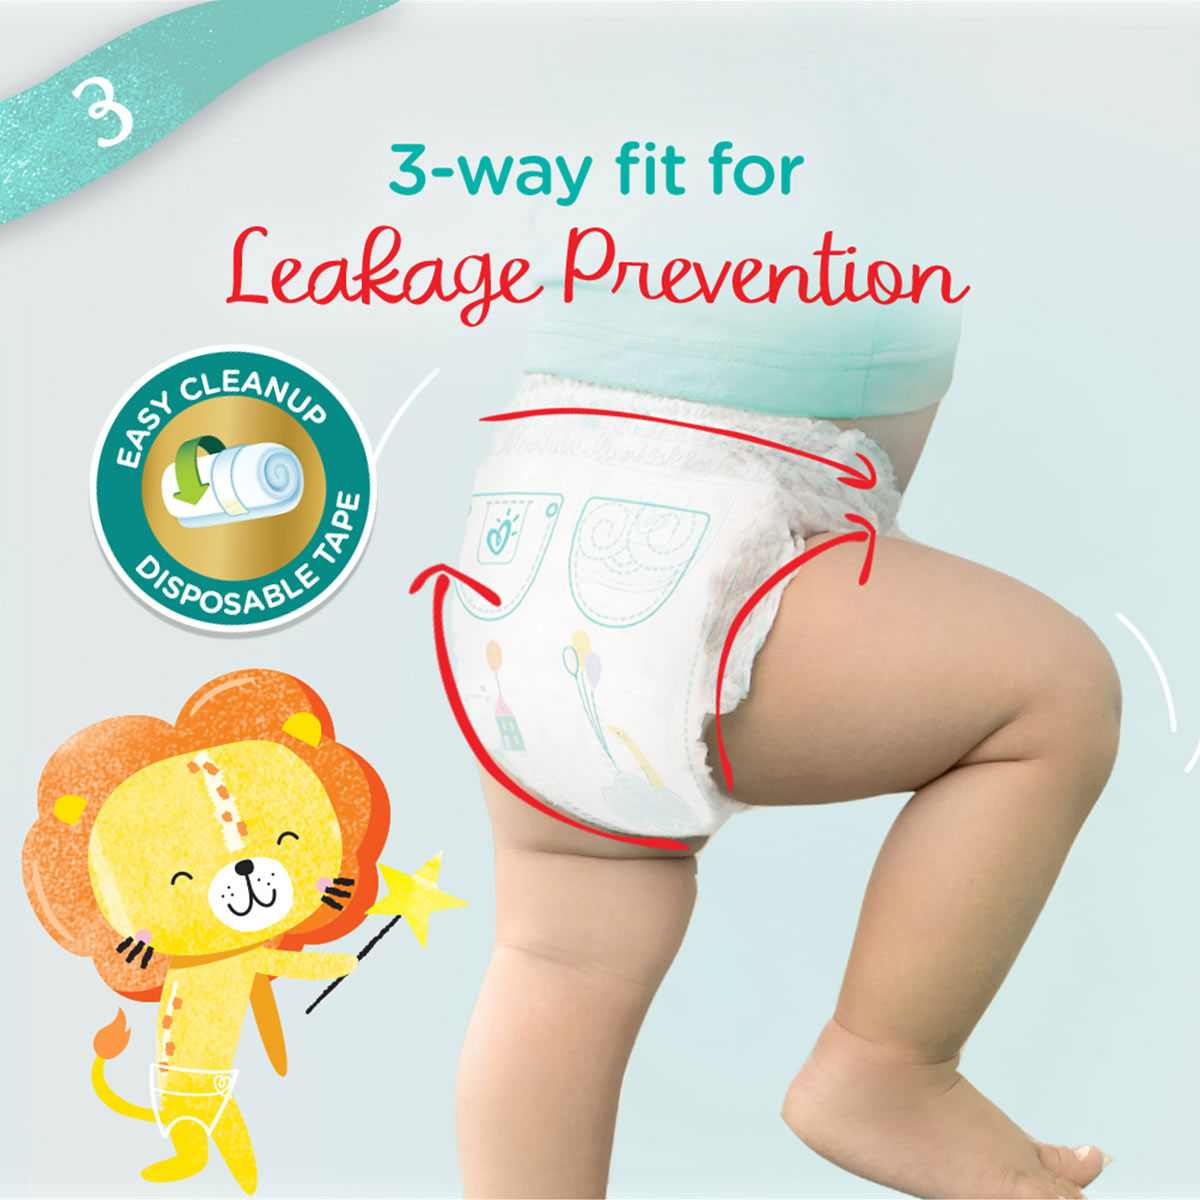 Buy Friends Premium Pants Diaper XL-XXL in Pune & Mumbai, India (2021) ⟶ Up  to 40% Off + Home Delivery | ElderLiving™